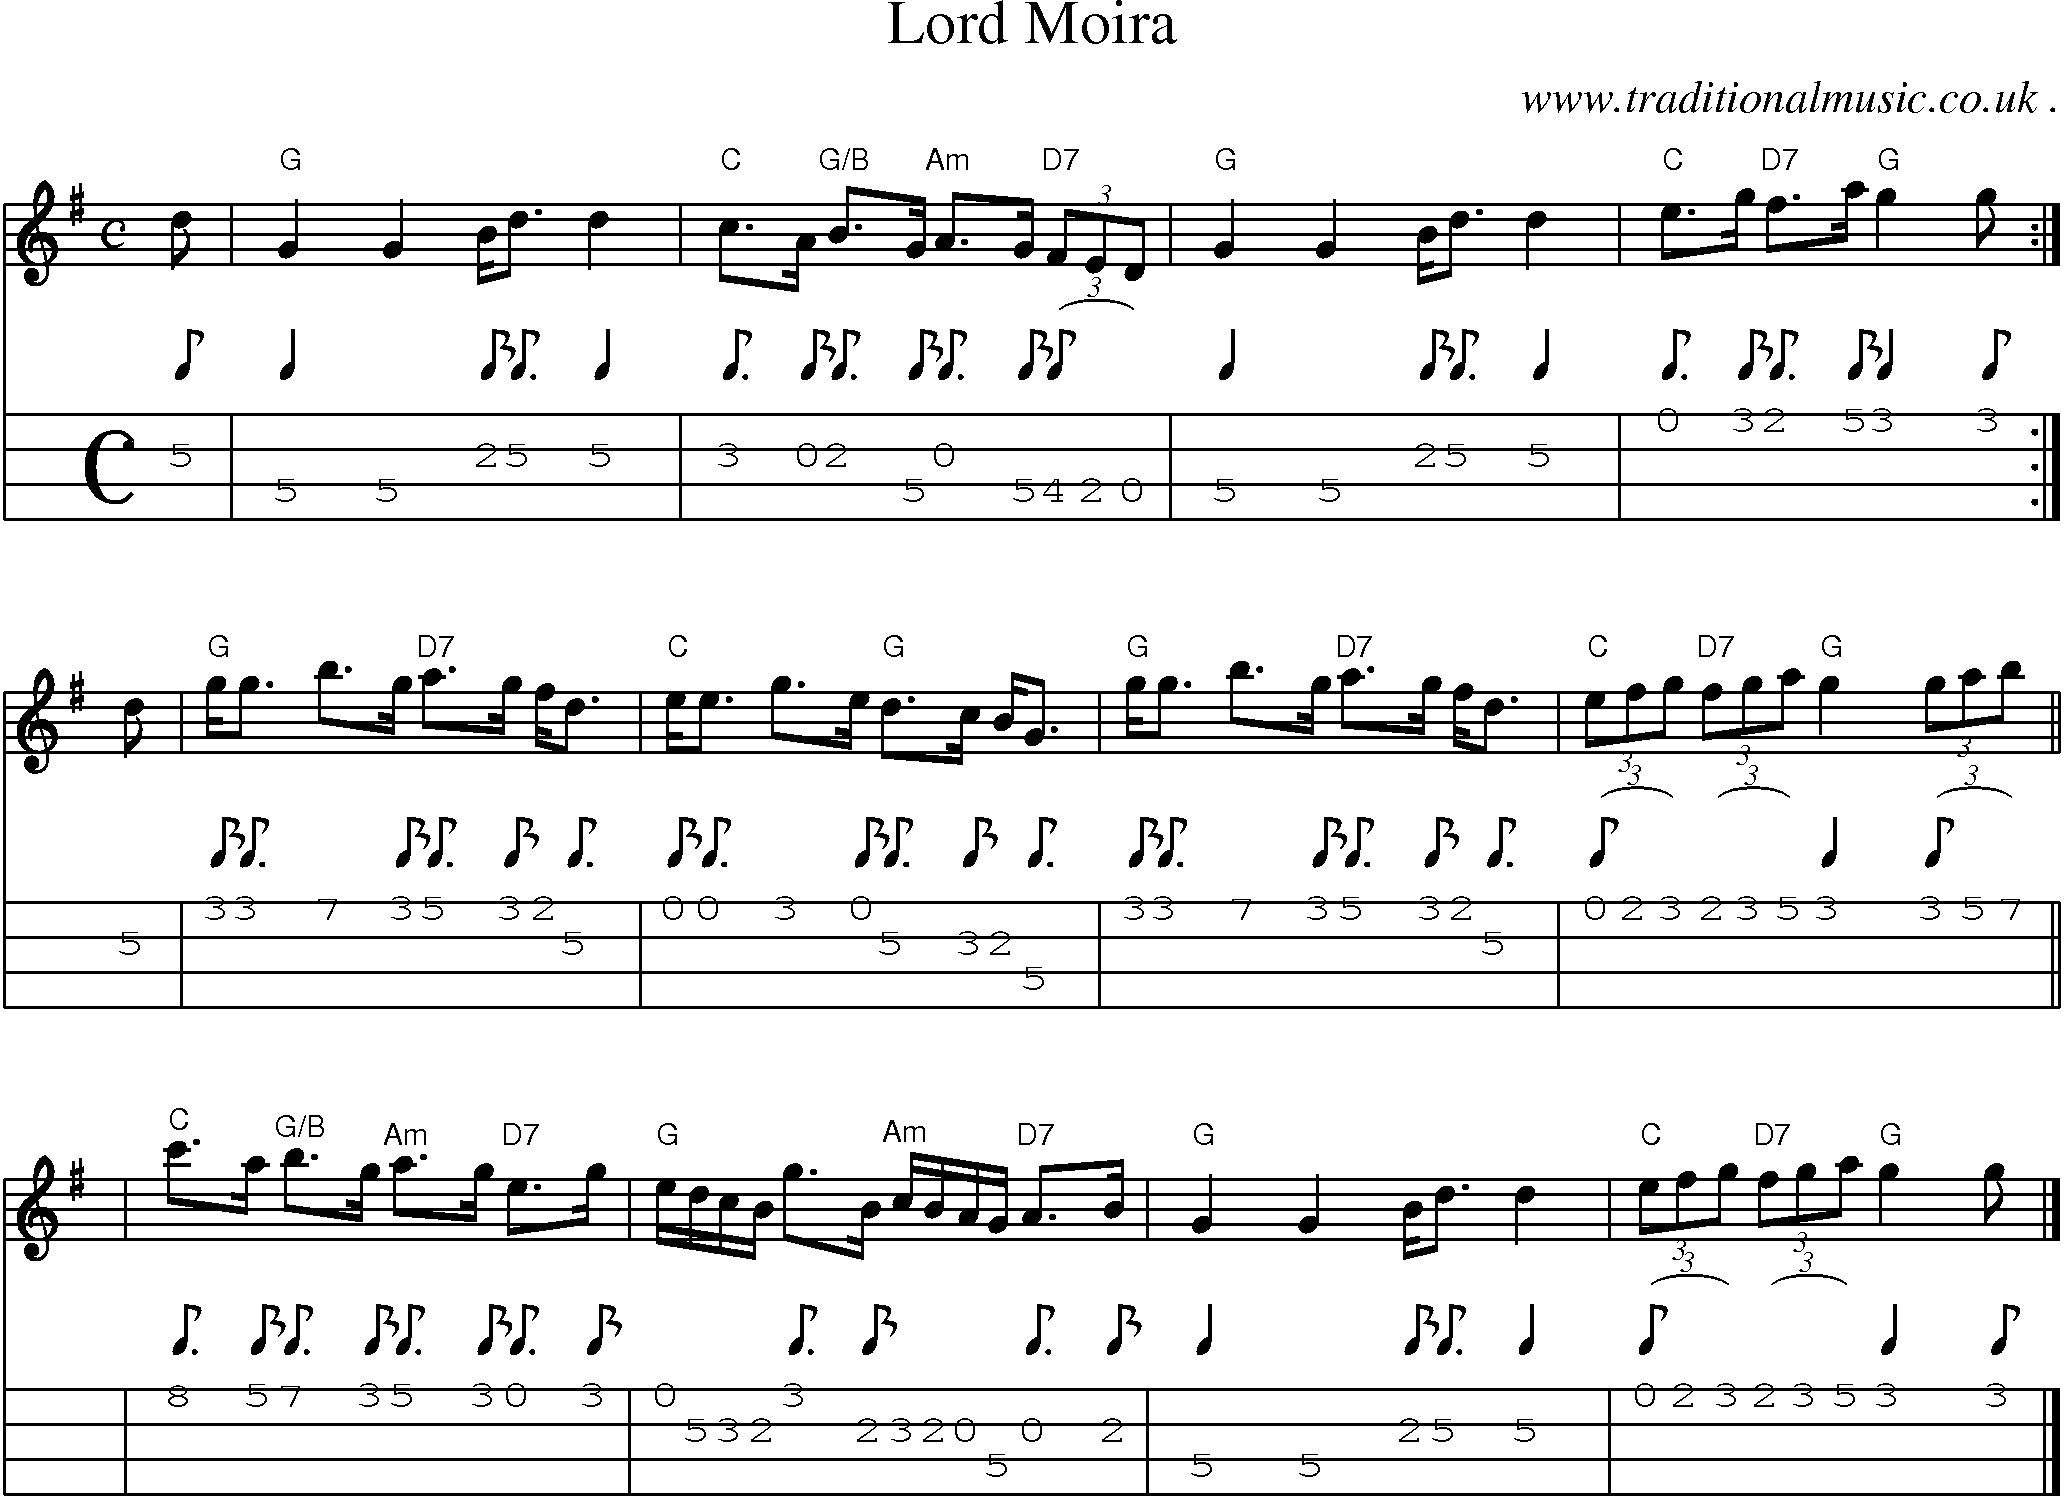 Sheet-music  score, Chords and Mandolin Tabs for Lord Moira